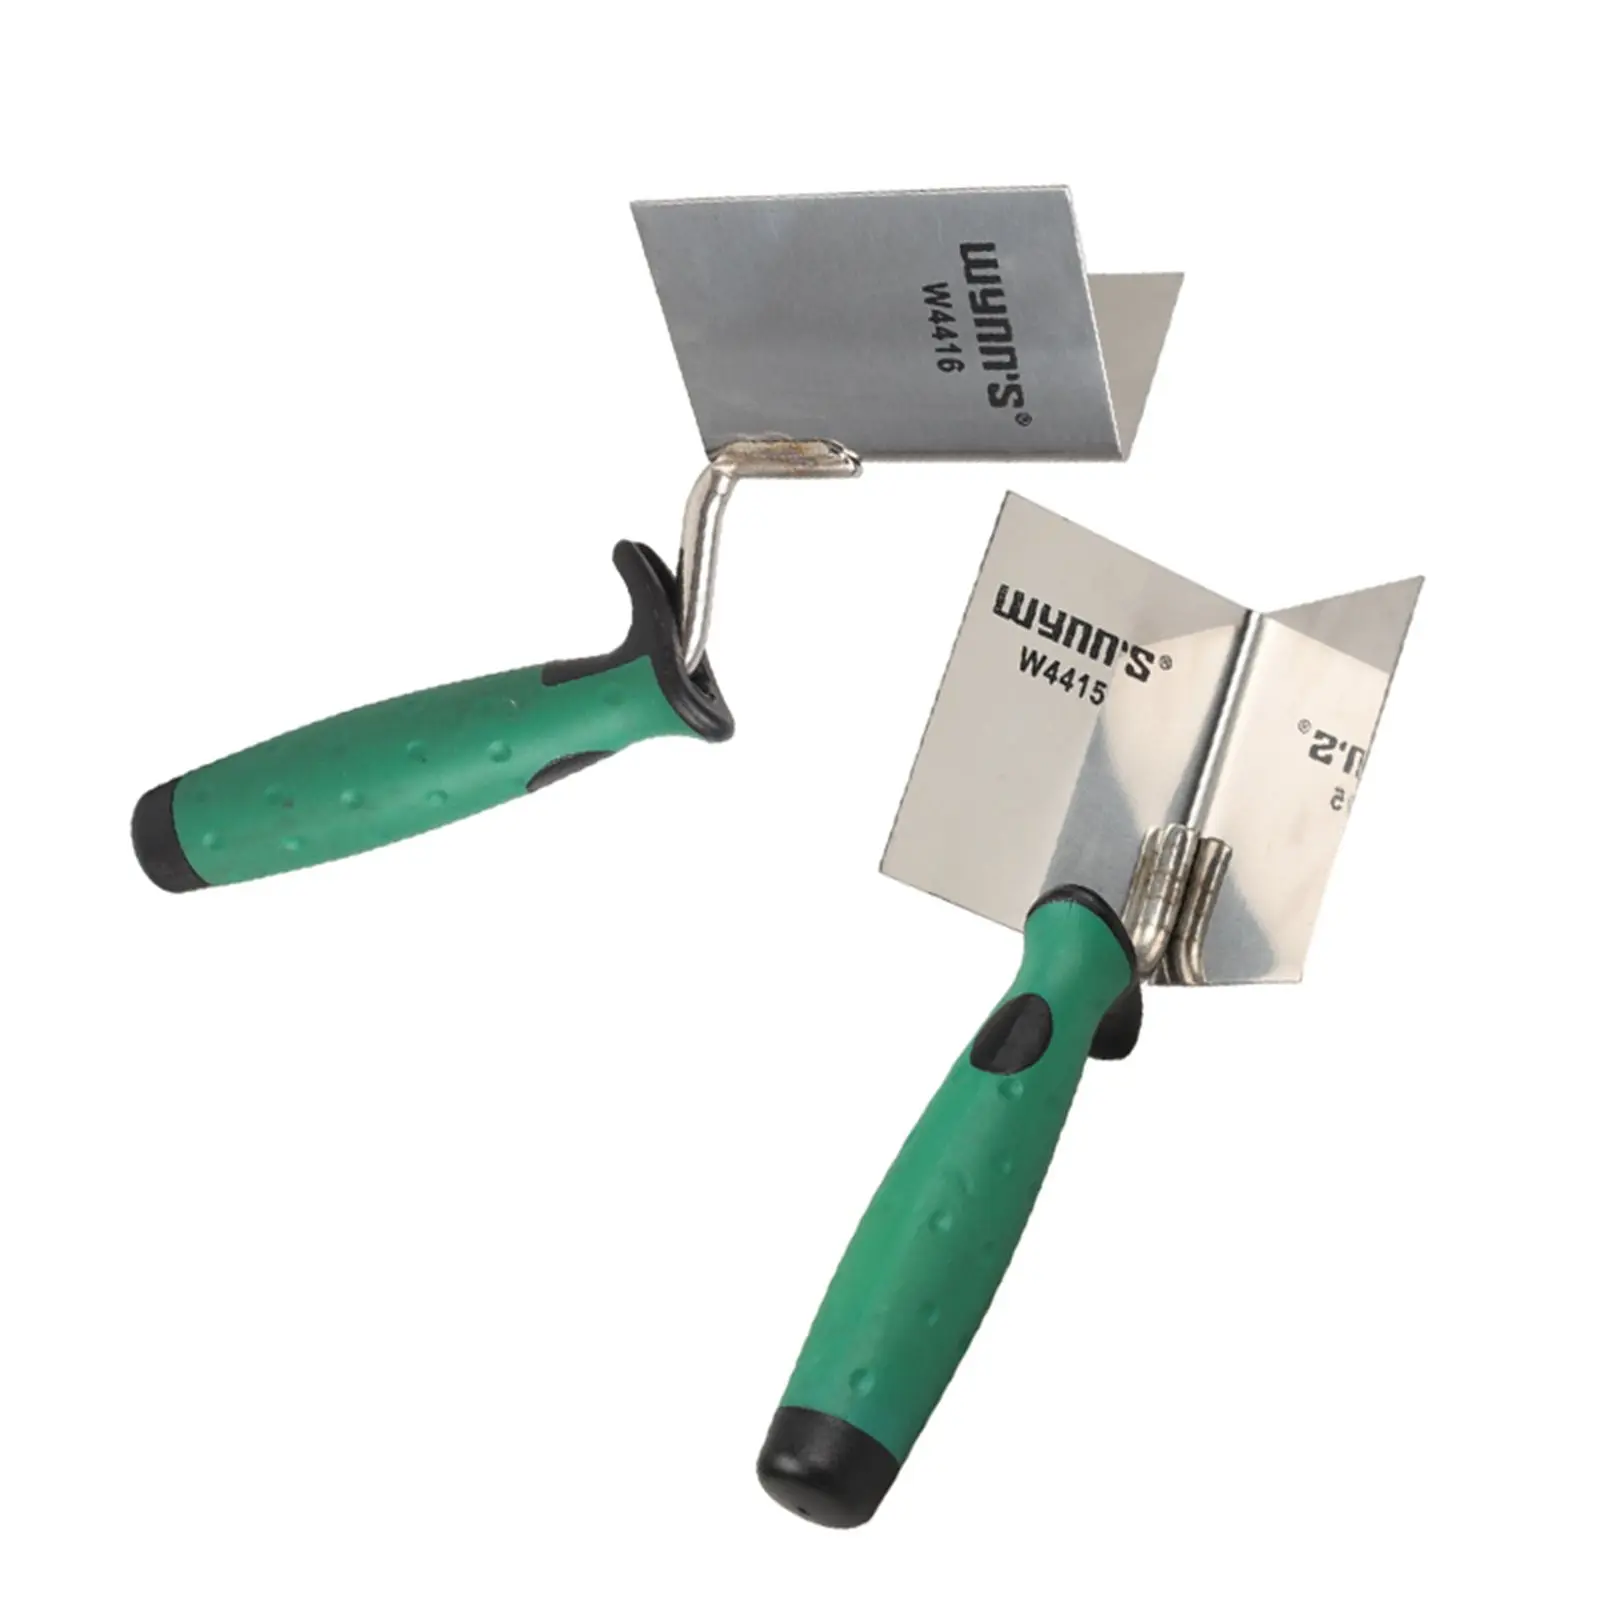 Inside/Outside Drywall Corner Tool Mudding Finish Tool Finishing Trowel with Soft Grip Hand Tool